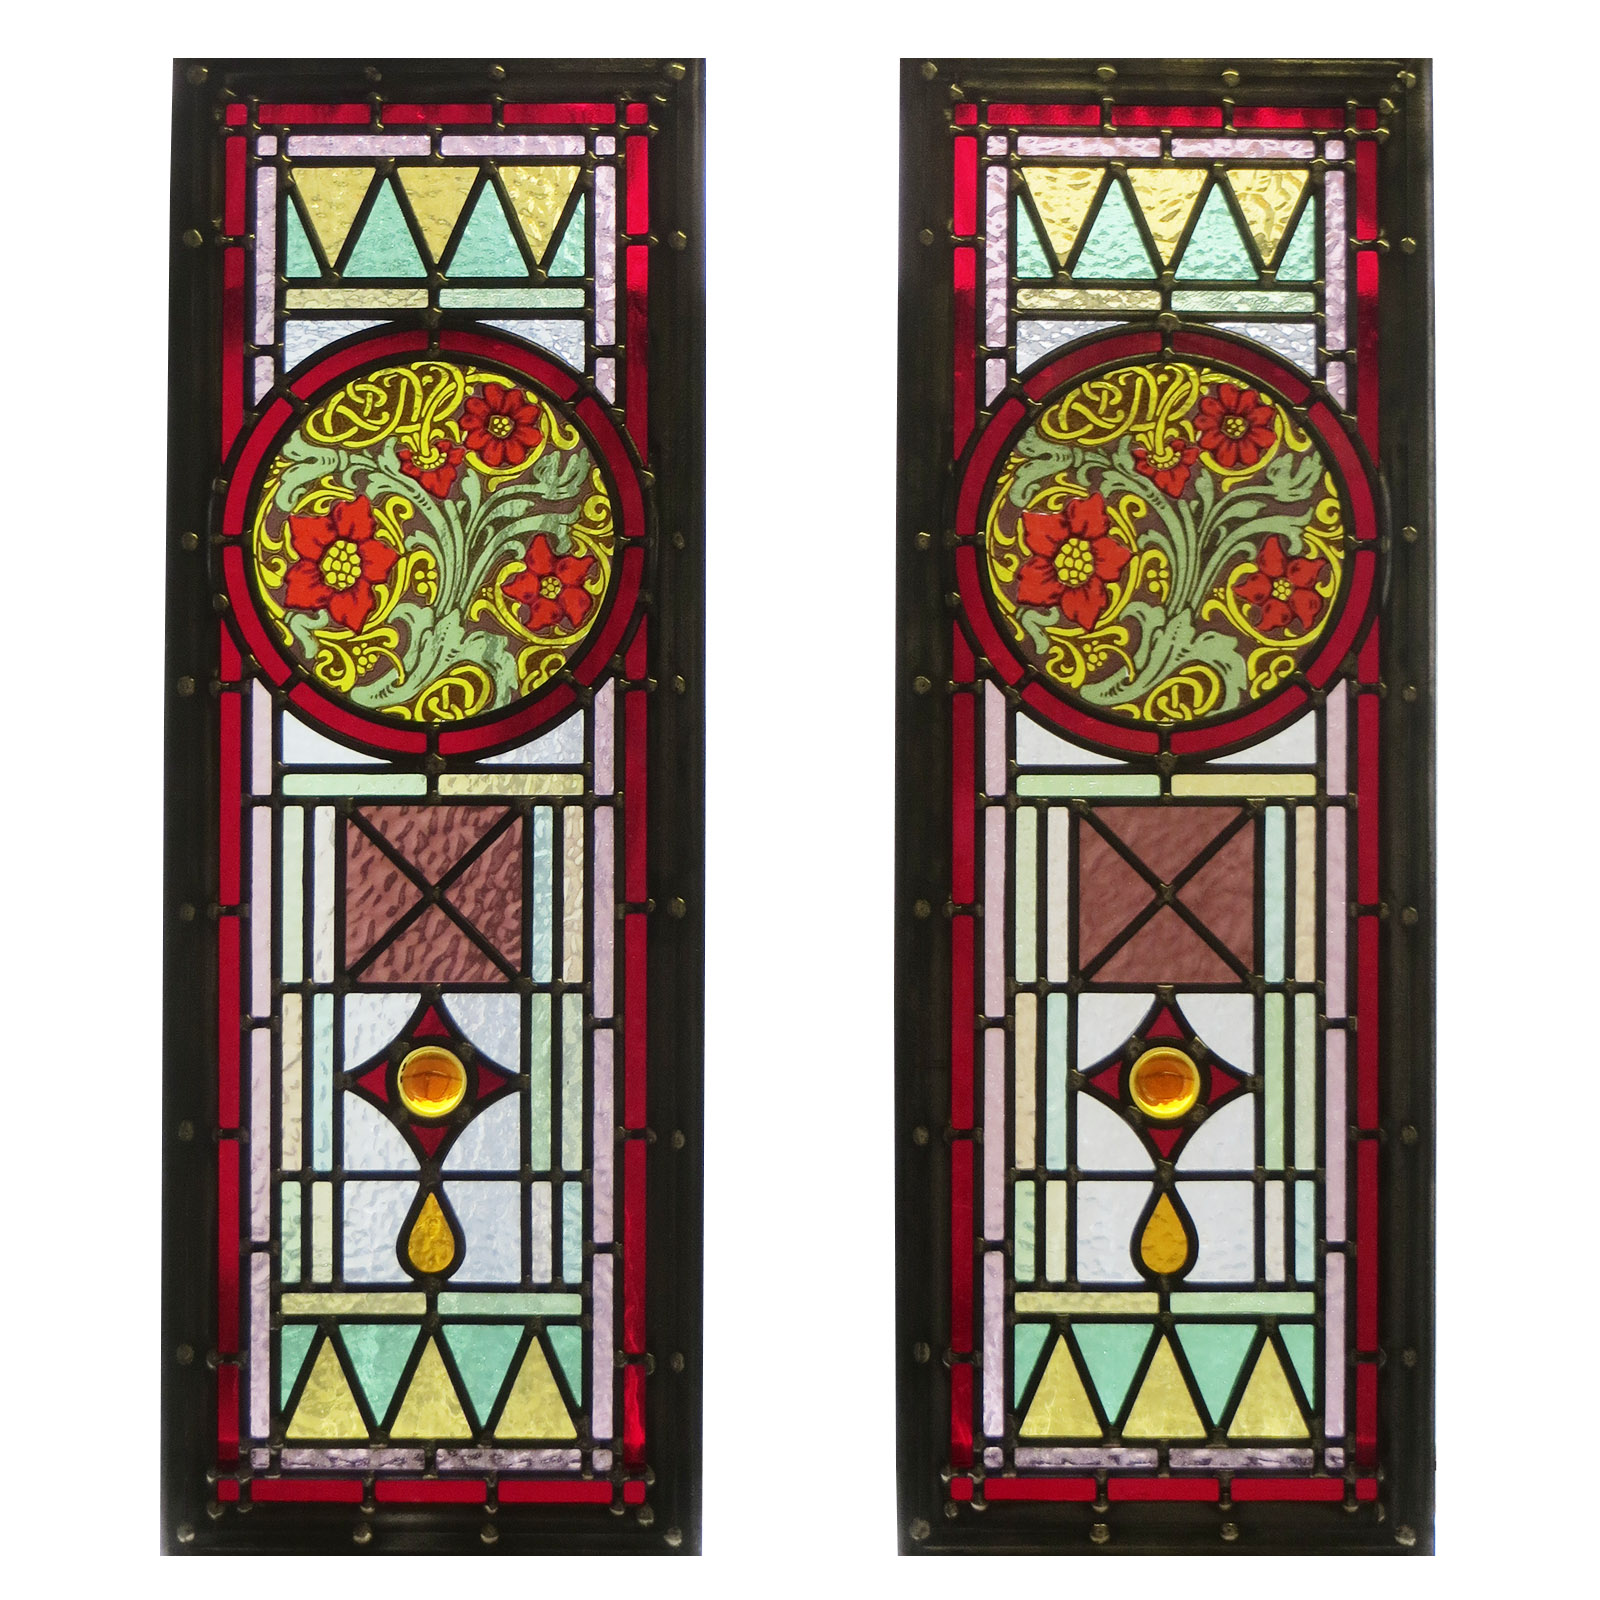 Intricate Art Deco Stained Glass Panels From Period Home Style